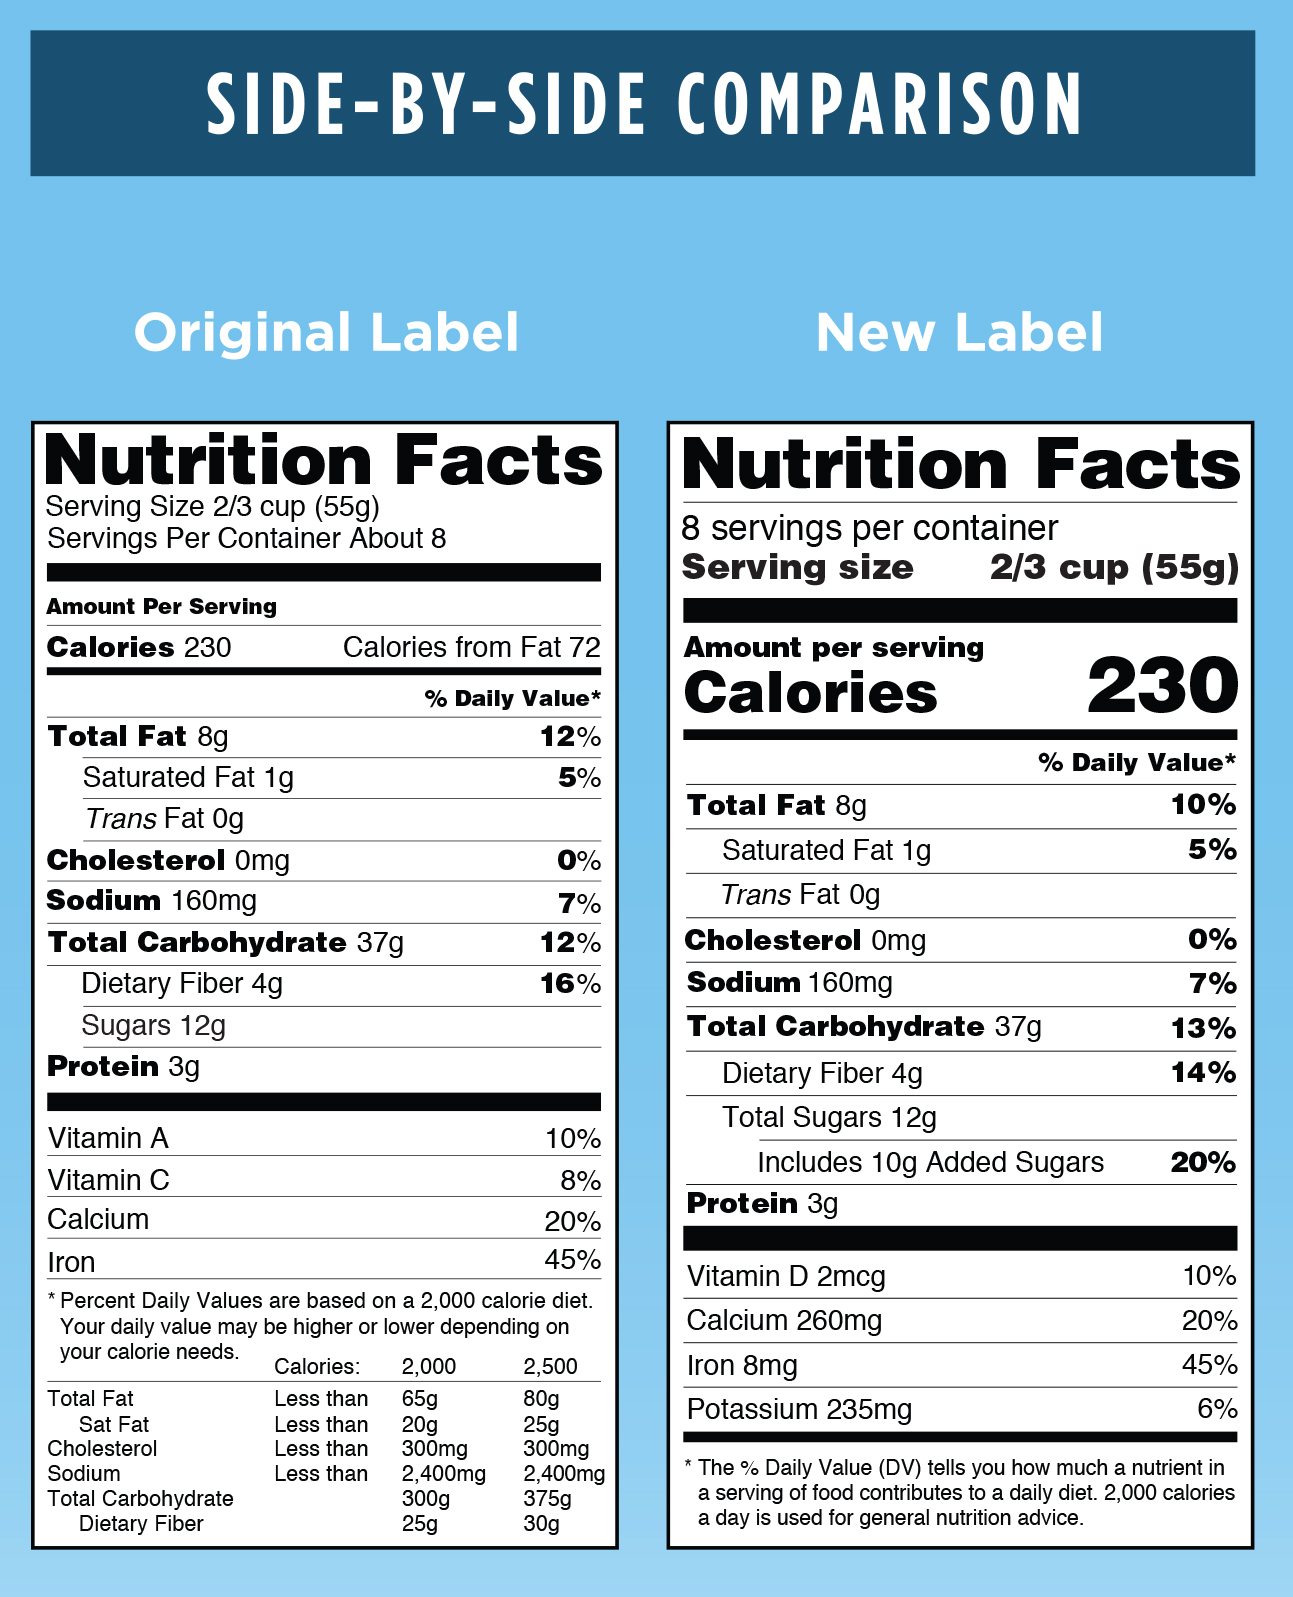 Changes to the Nutrition Facts Label: What Parents Need to Know 